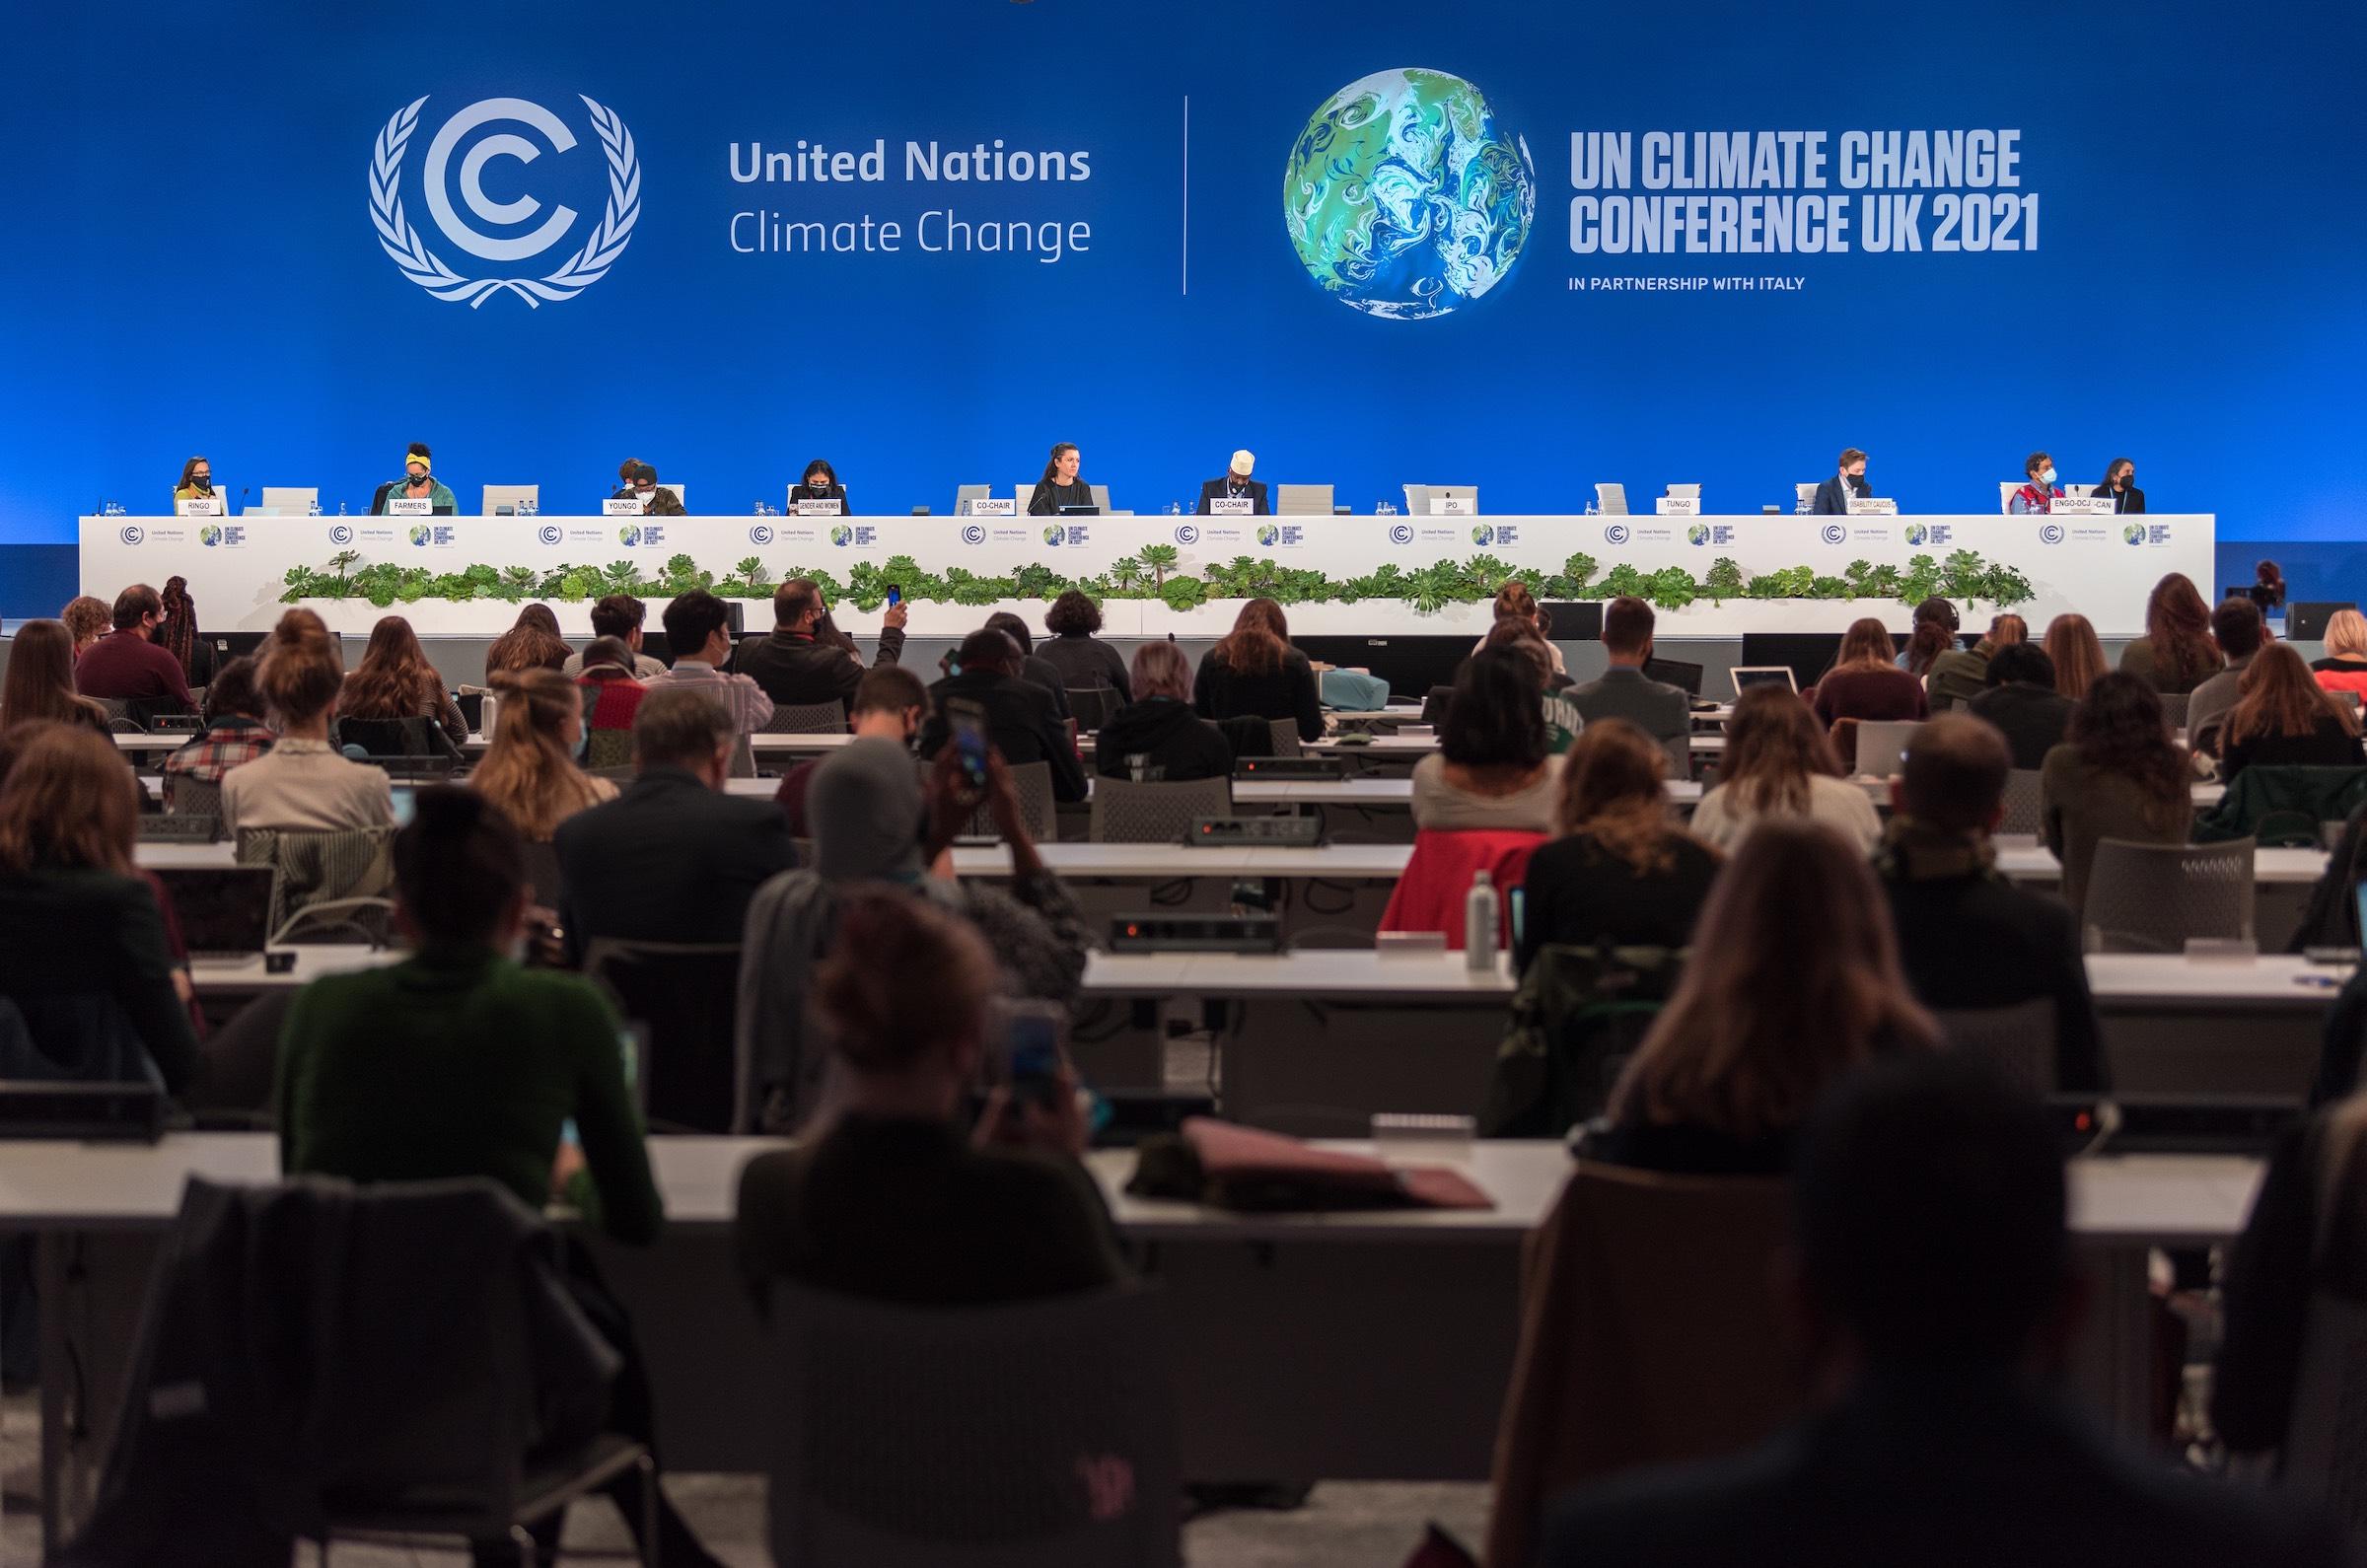 Glasgow hosted the UN climate conference COP26, where world leaders gathered to negotiate a response to the ongoing climate crisis and emergency. Photo: LWF/Albin Hillert 